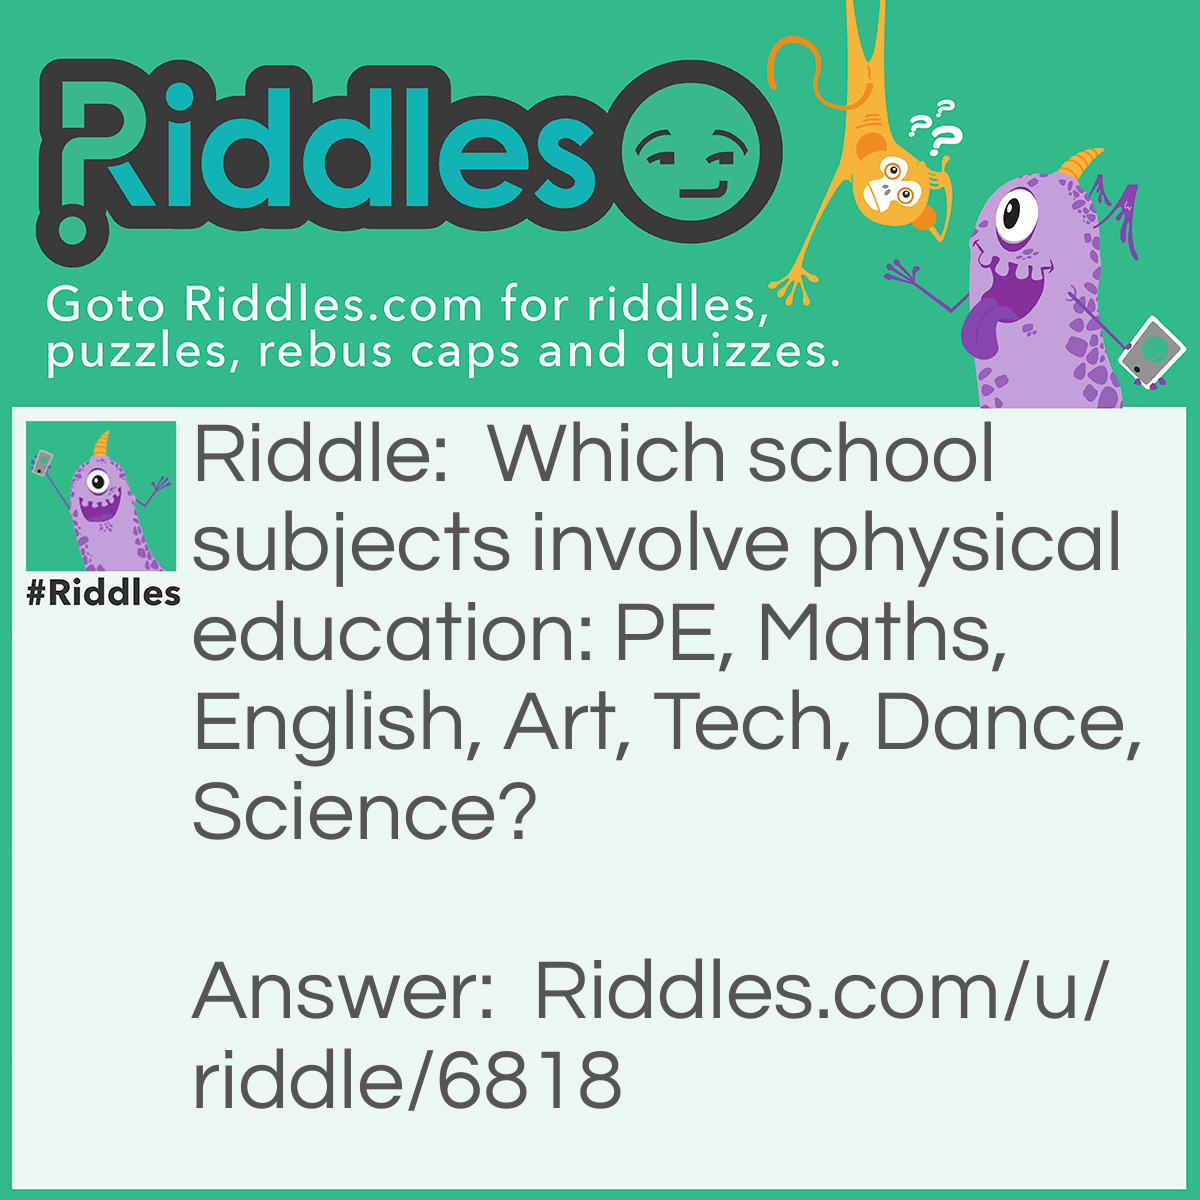 Riddle: Which school subjects involve physical education: PE, Maths, English, Art, Tech, Dance, Science? Answer: ALL of these school subjects involve physical education as the teacher is physically educating you.